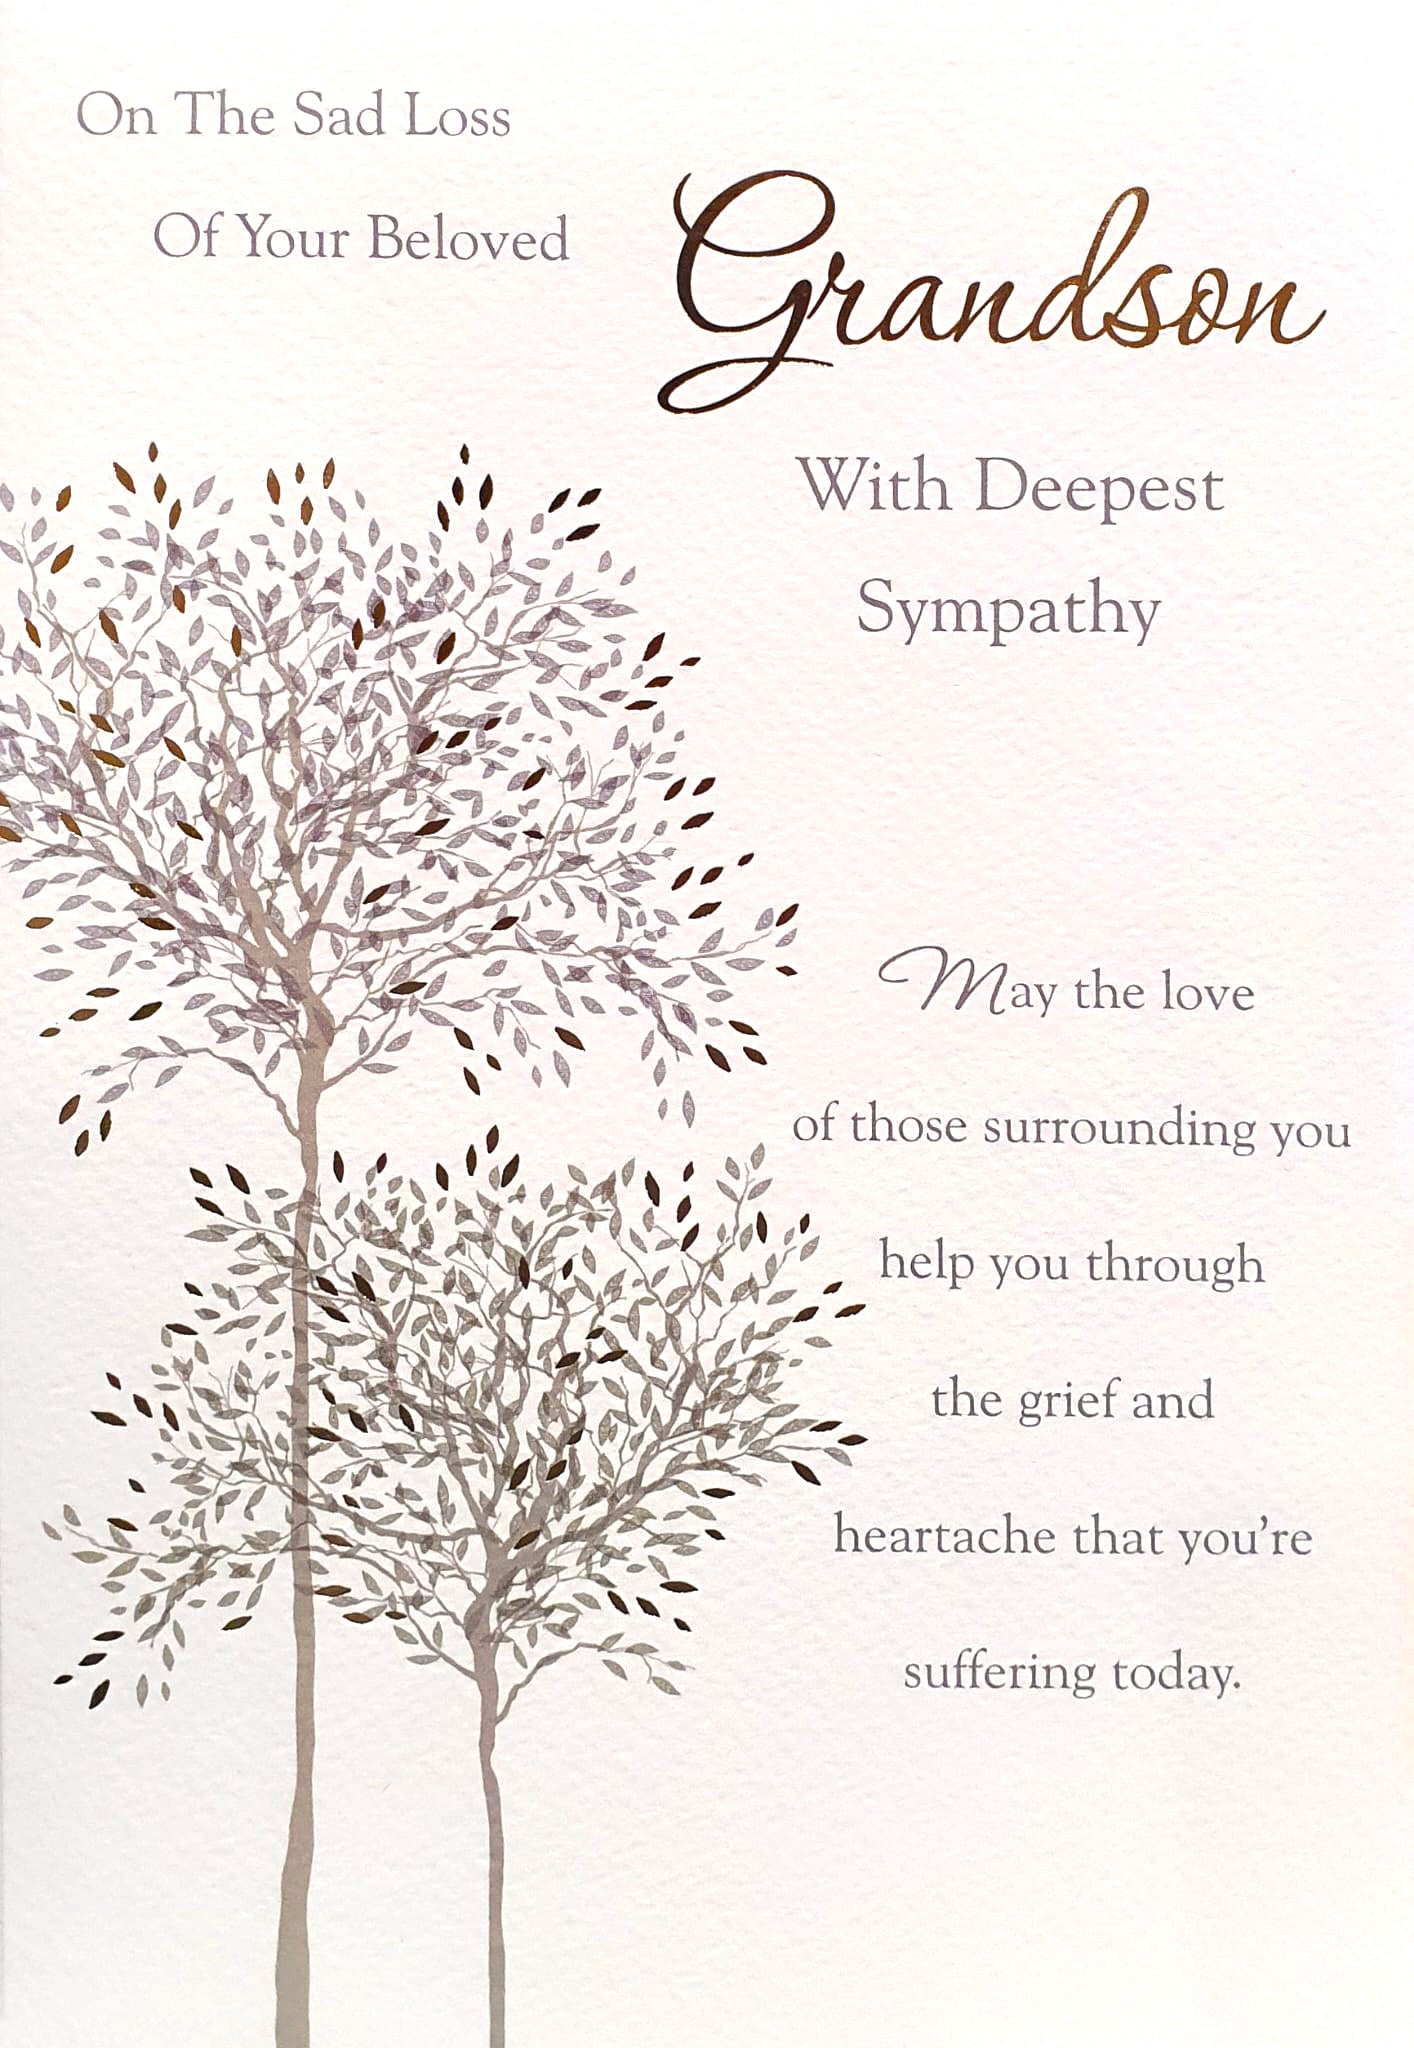 Grandson Sympathy Card - The Tree Of Remembrance